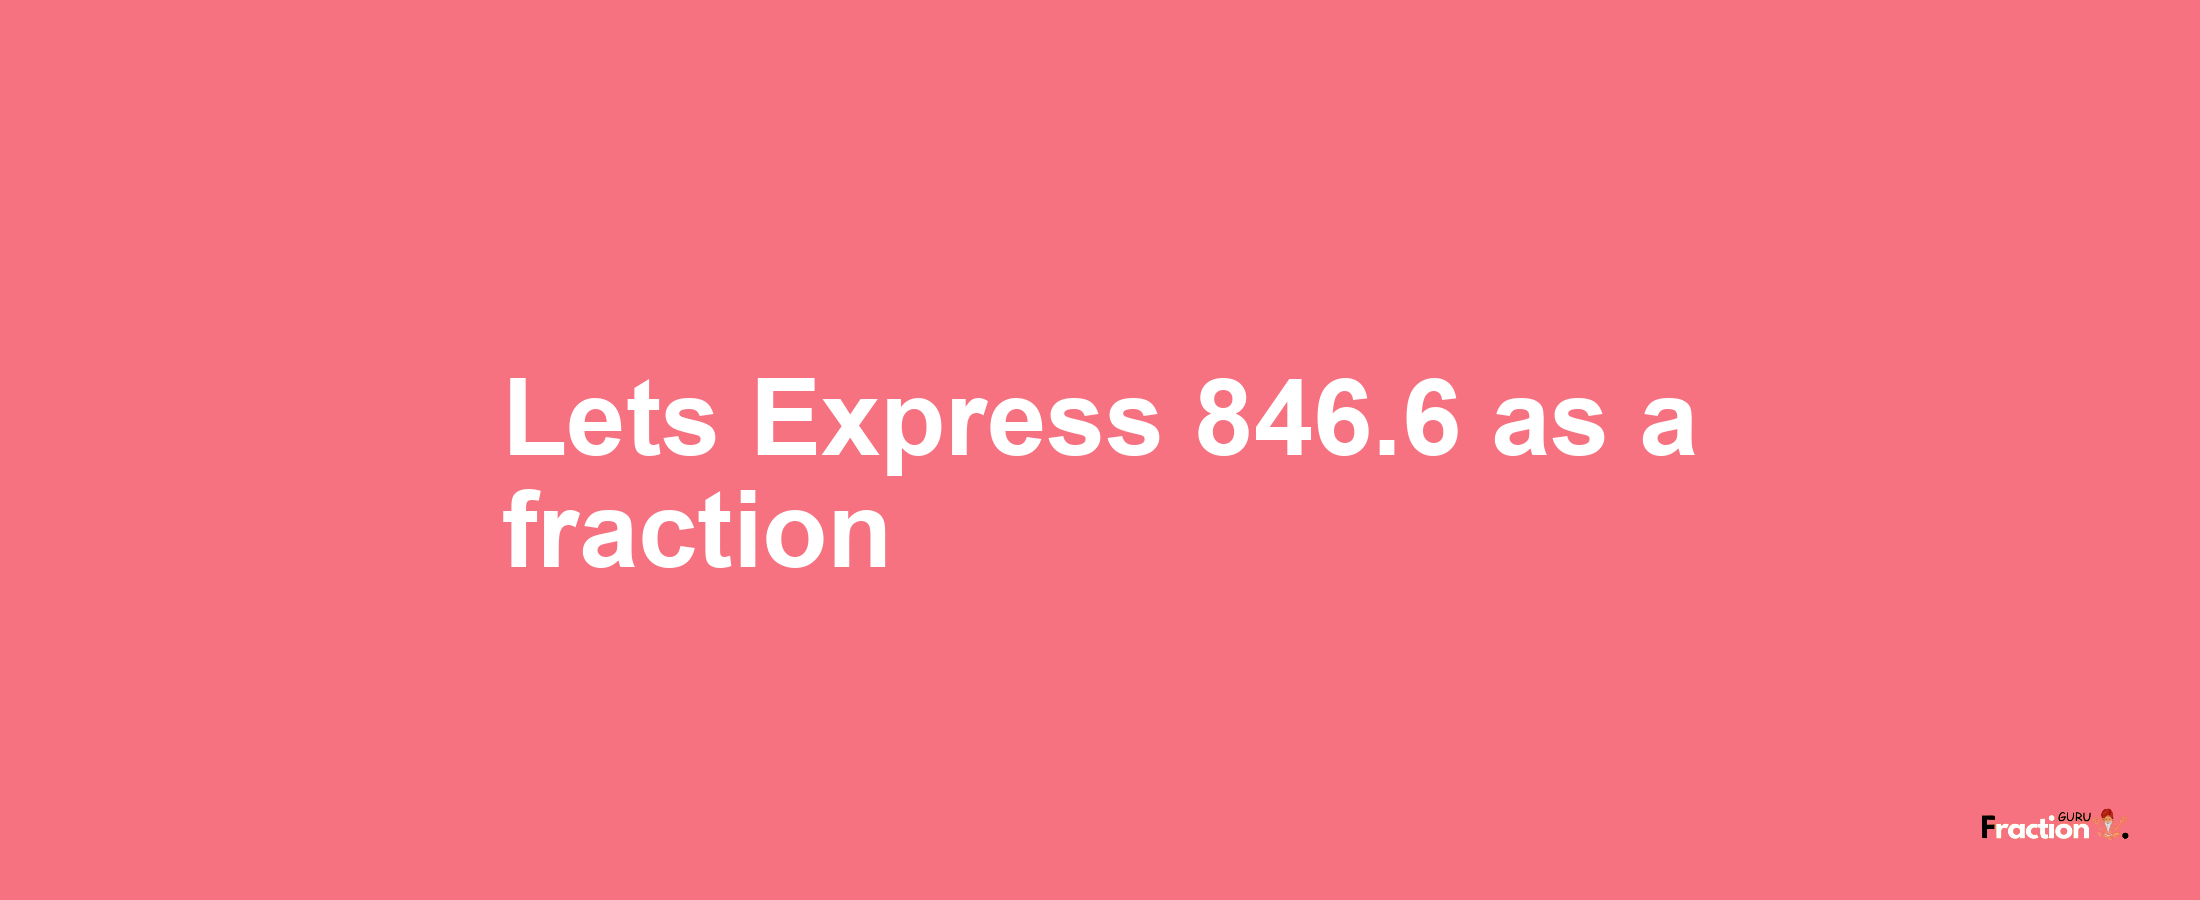 Lets Express 846.6 as afraction